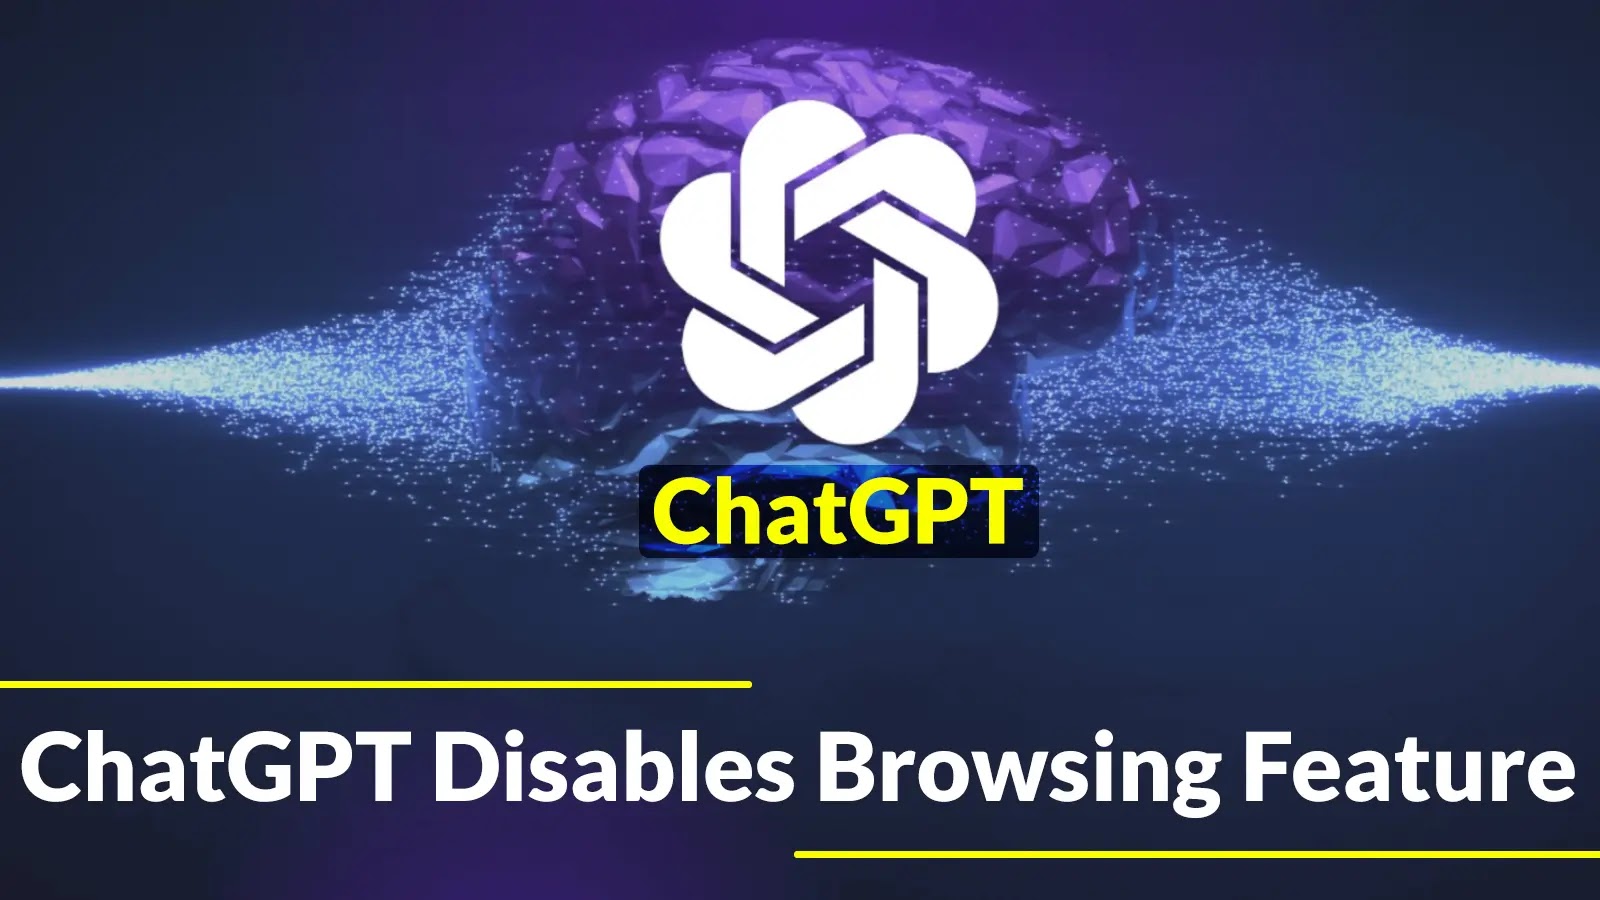 ChatGPT Browsing Feature